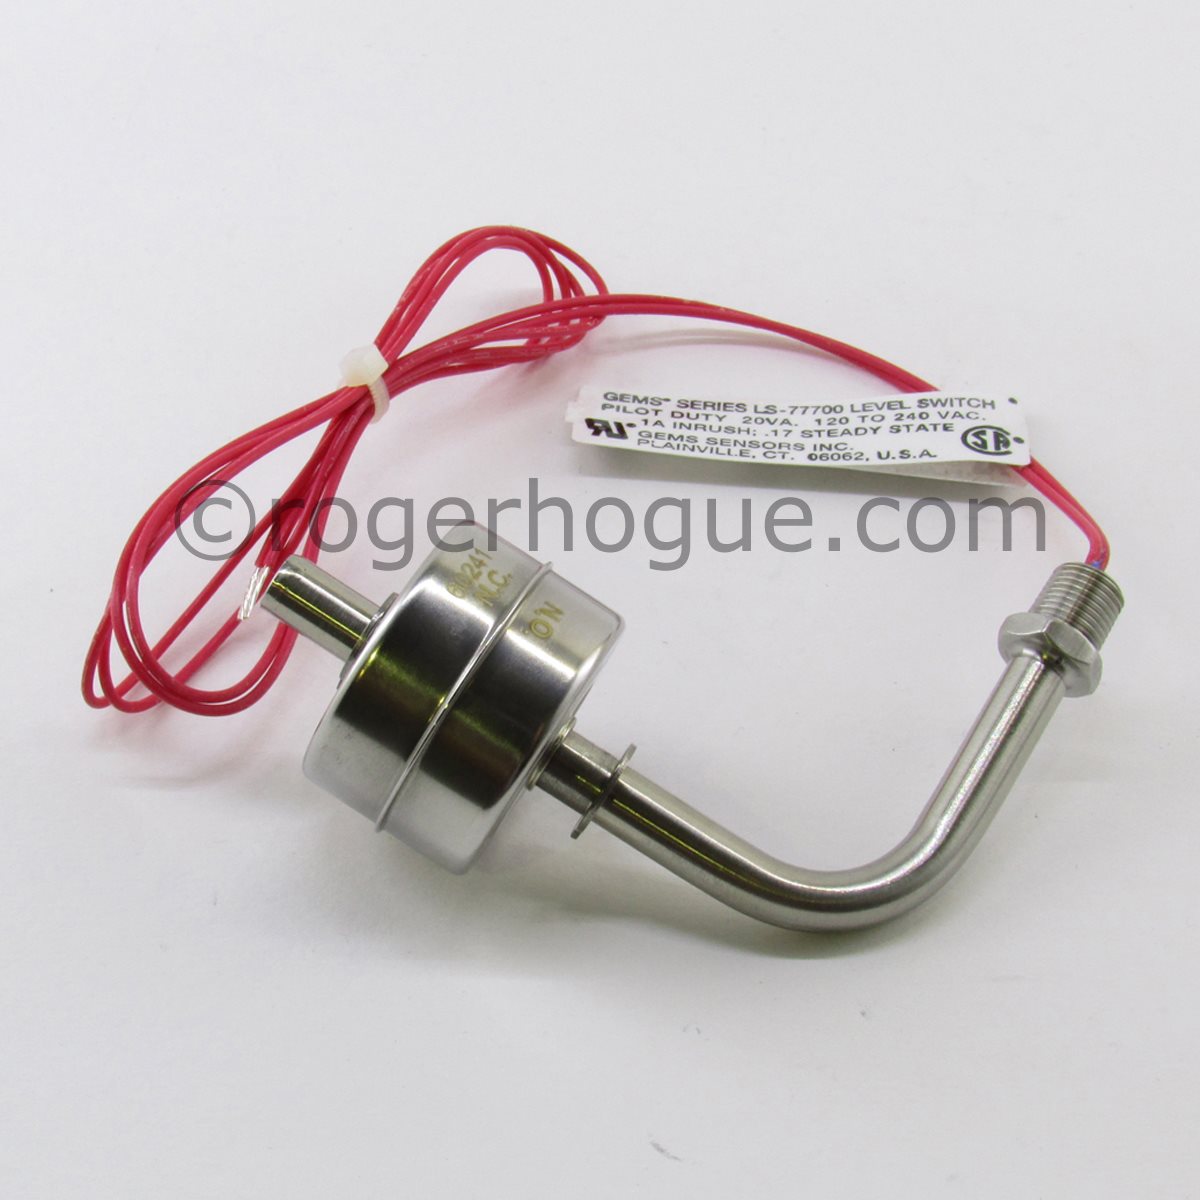 STAINLESS STEEL SERIES LS-77700 FLOAT SWITCH